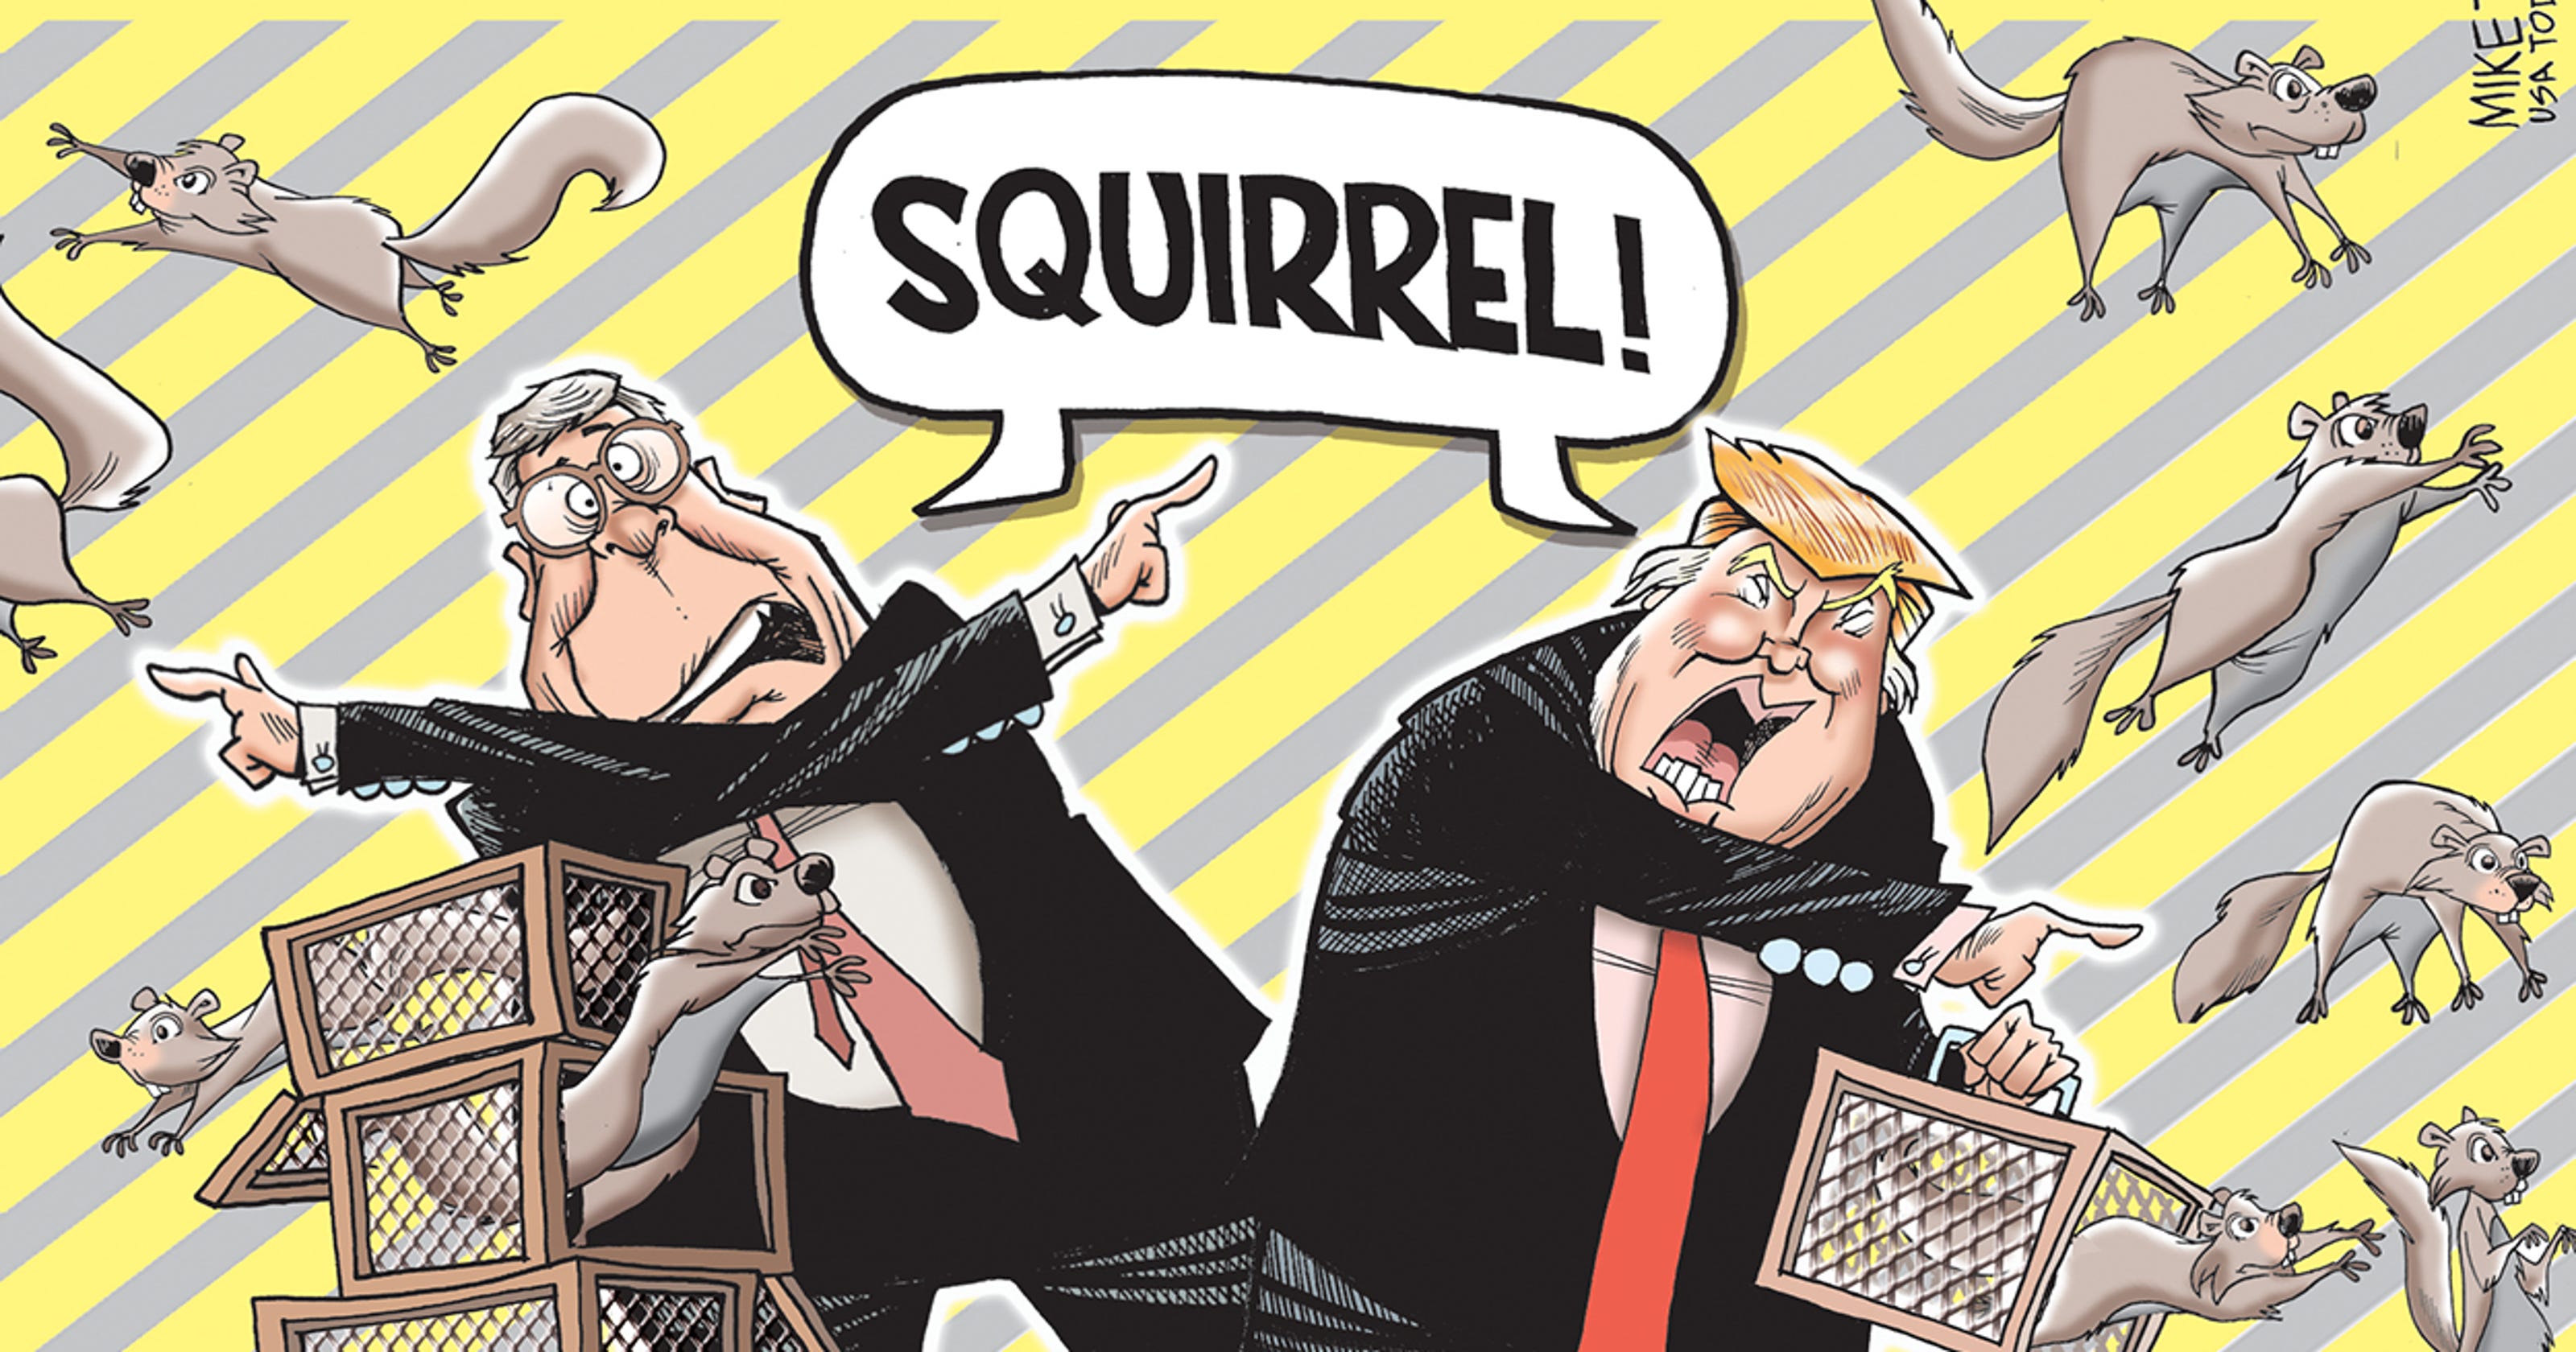 April political cartoons from the USA TODAY network